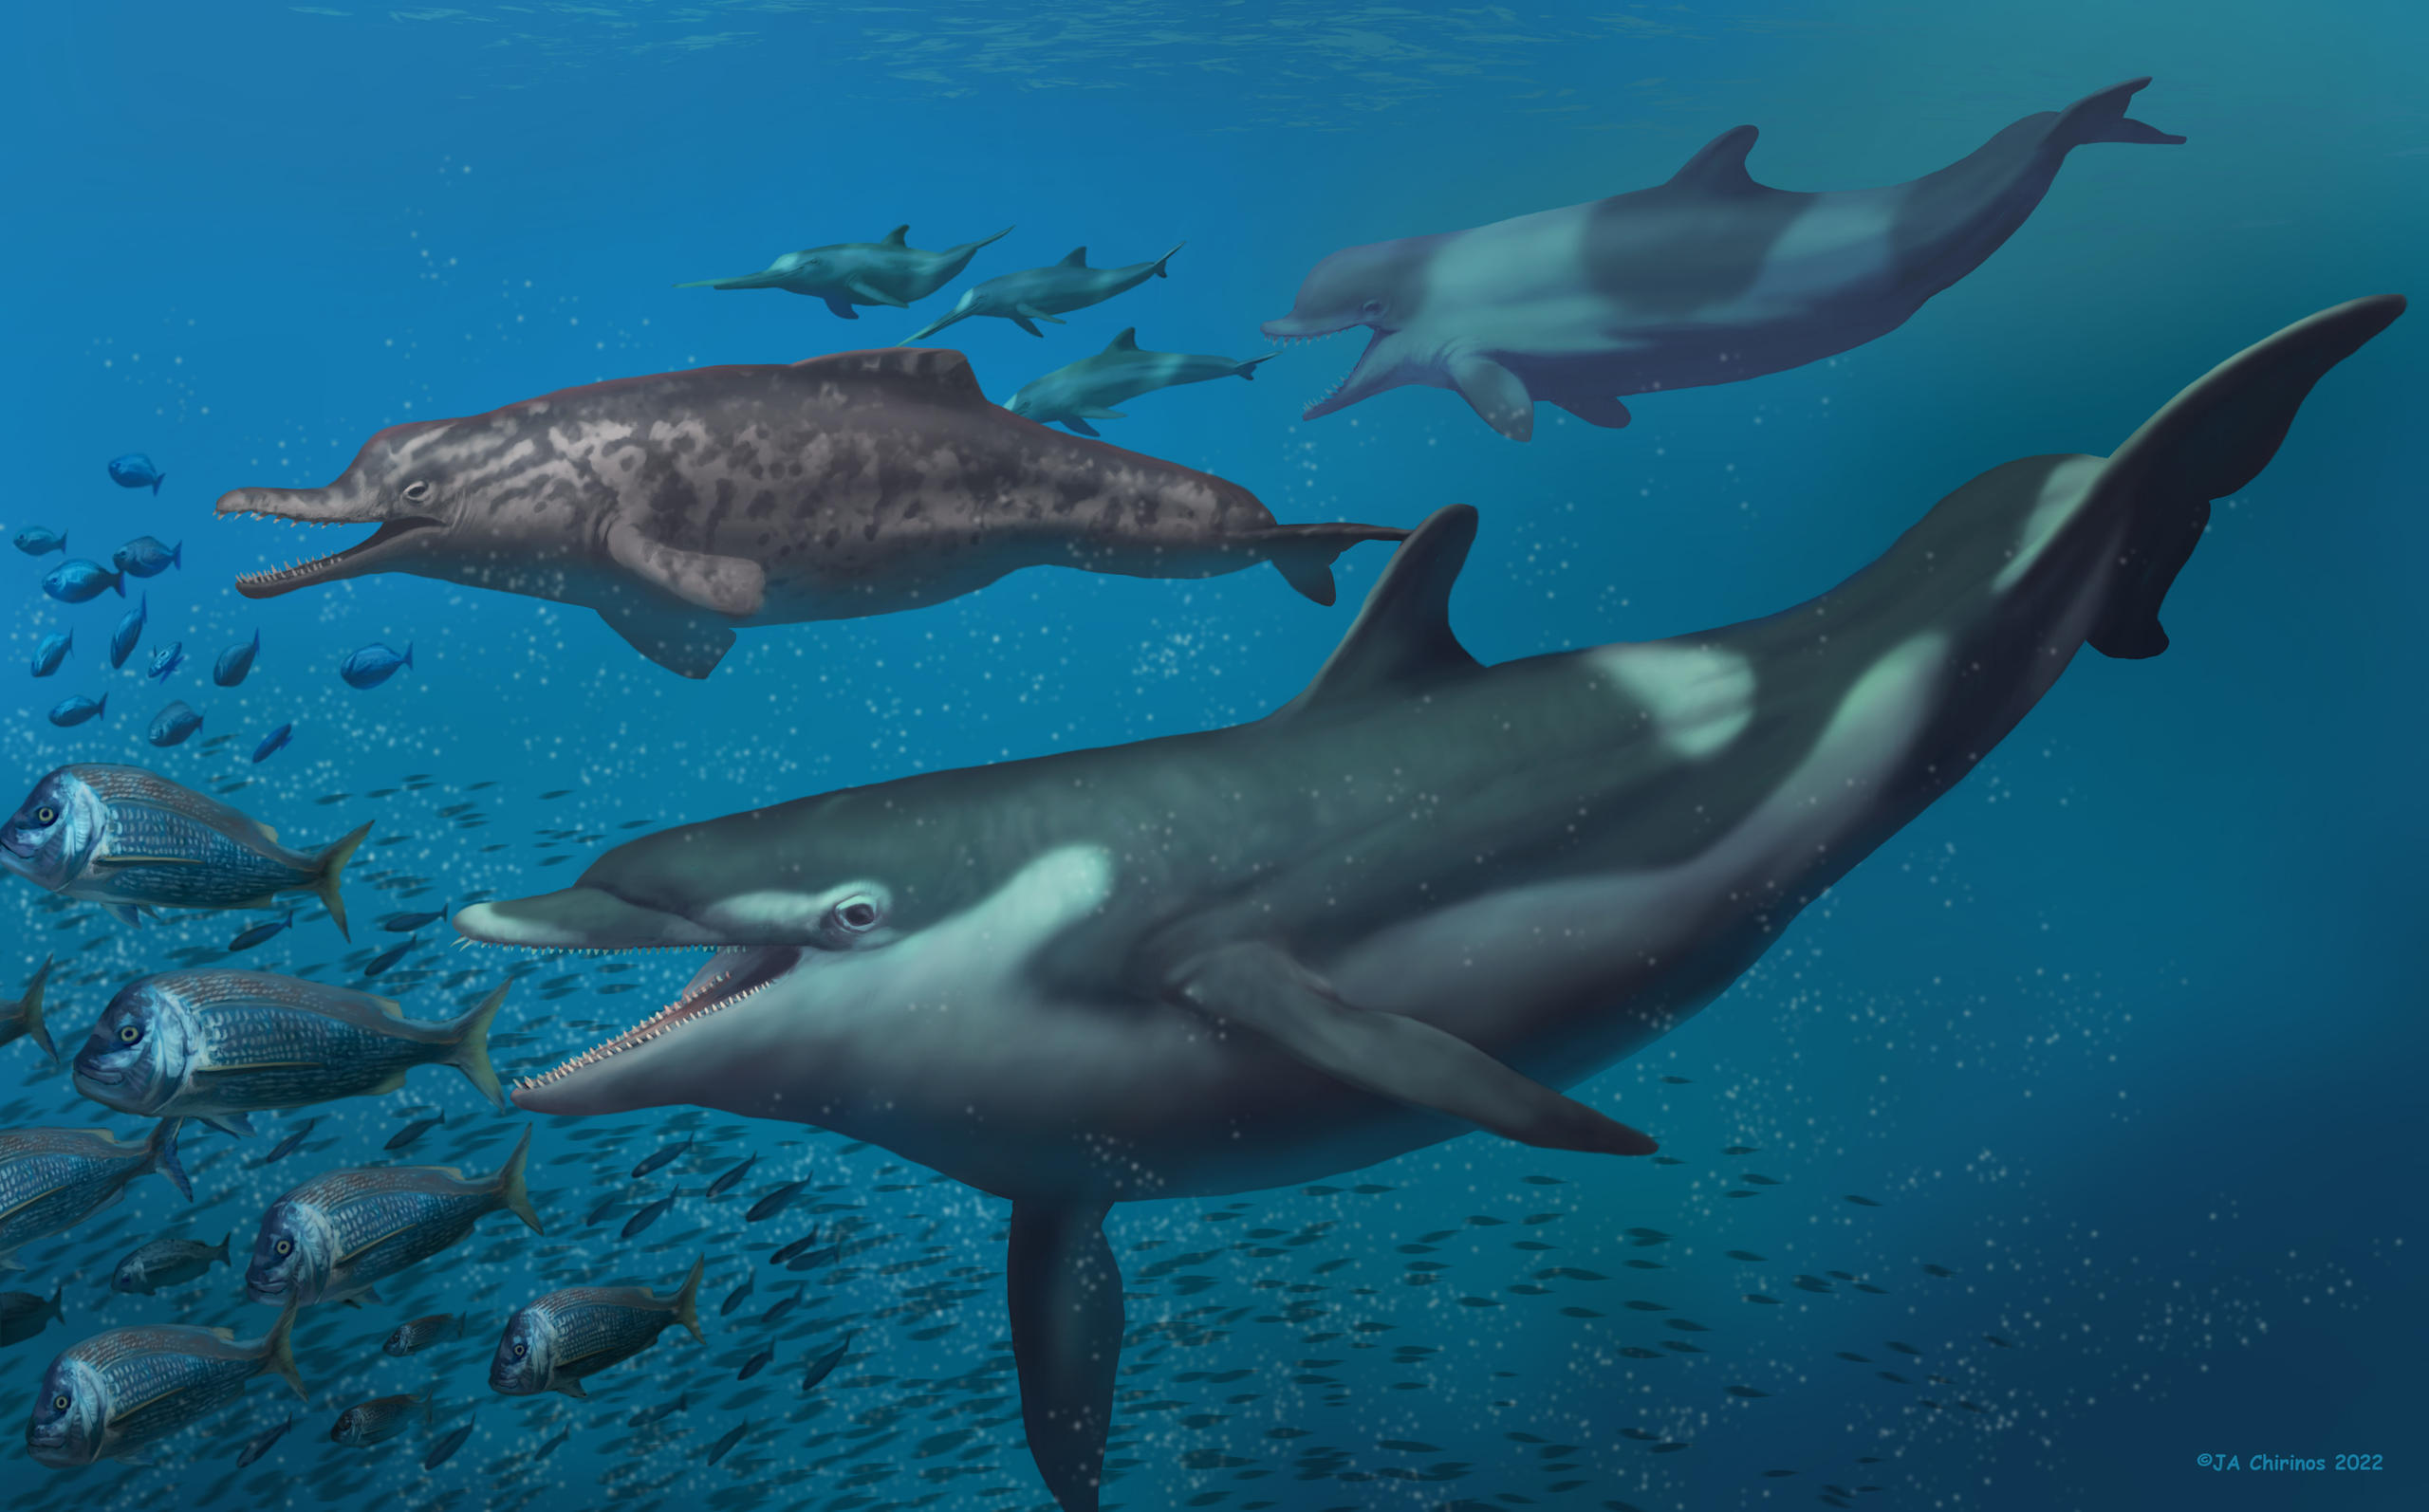 Artist depiction of the prehistoric dolphins swimming in the ocean